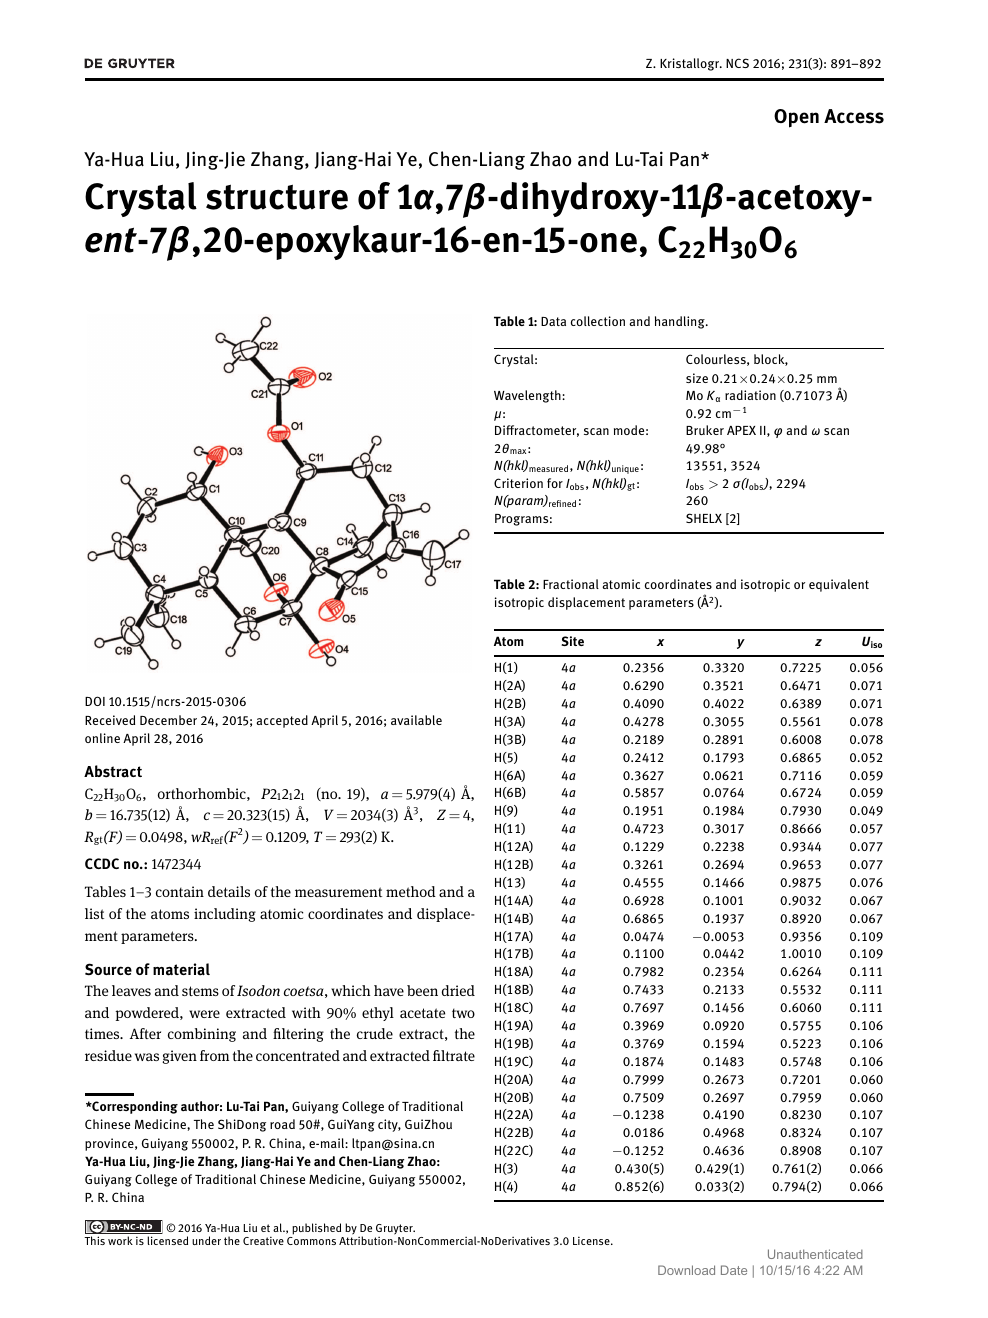 Crystal Structure Of 1a 7b Dihydroxy 11b Acetoxy Ent 7b Epoxykaur 16 En 15 One C22h30o6 Topic Of Research Paper In Chemical Sciences Download Scholarly Article Pdf And Read For Free On Cyberleninka Open Science Hub